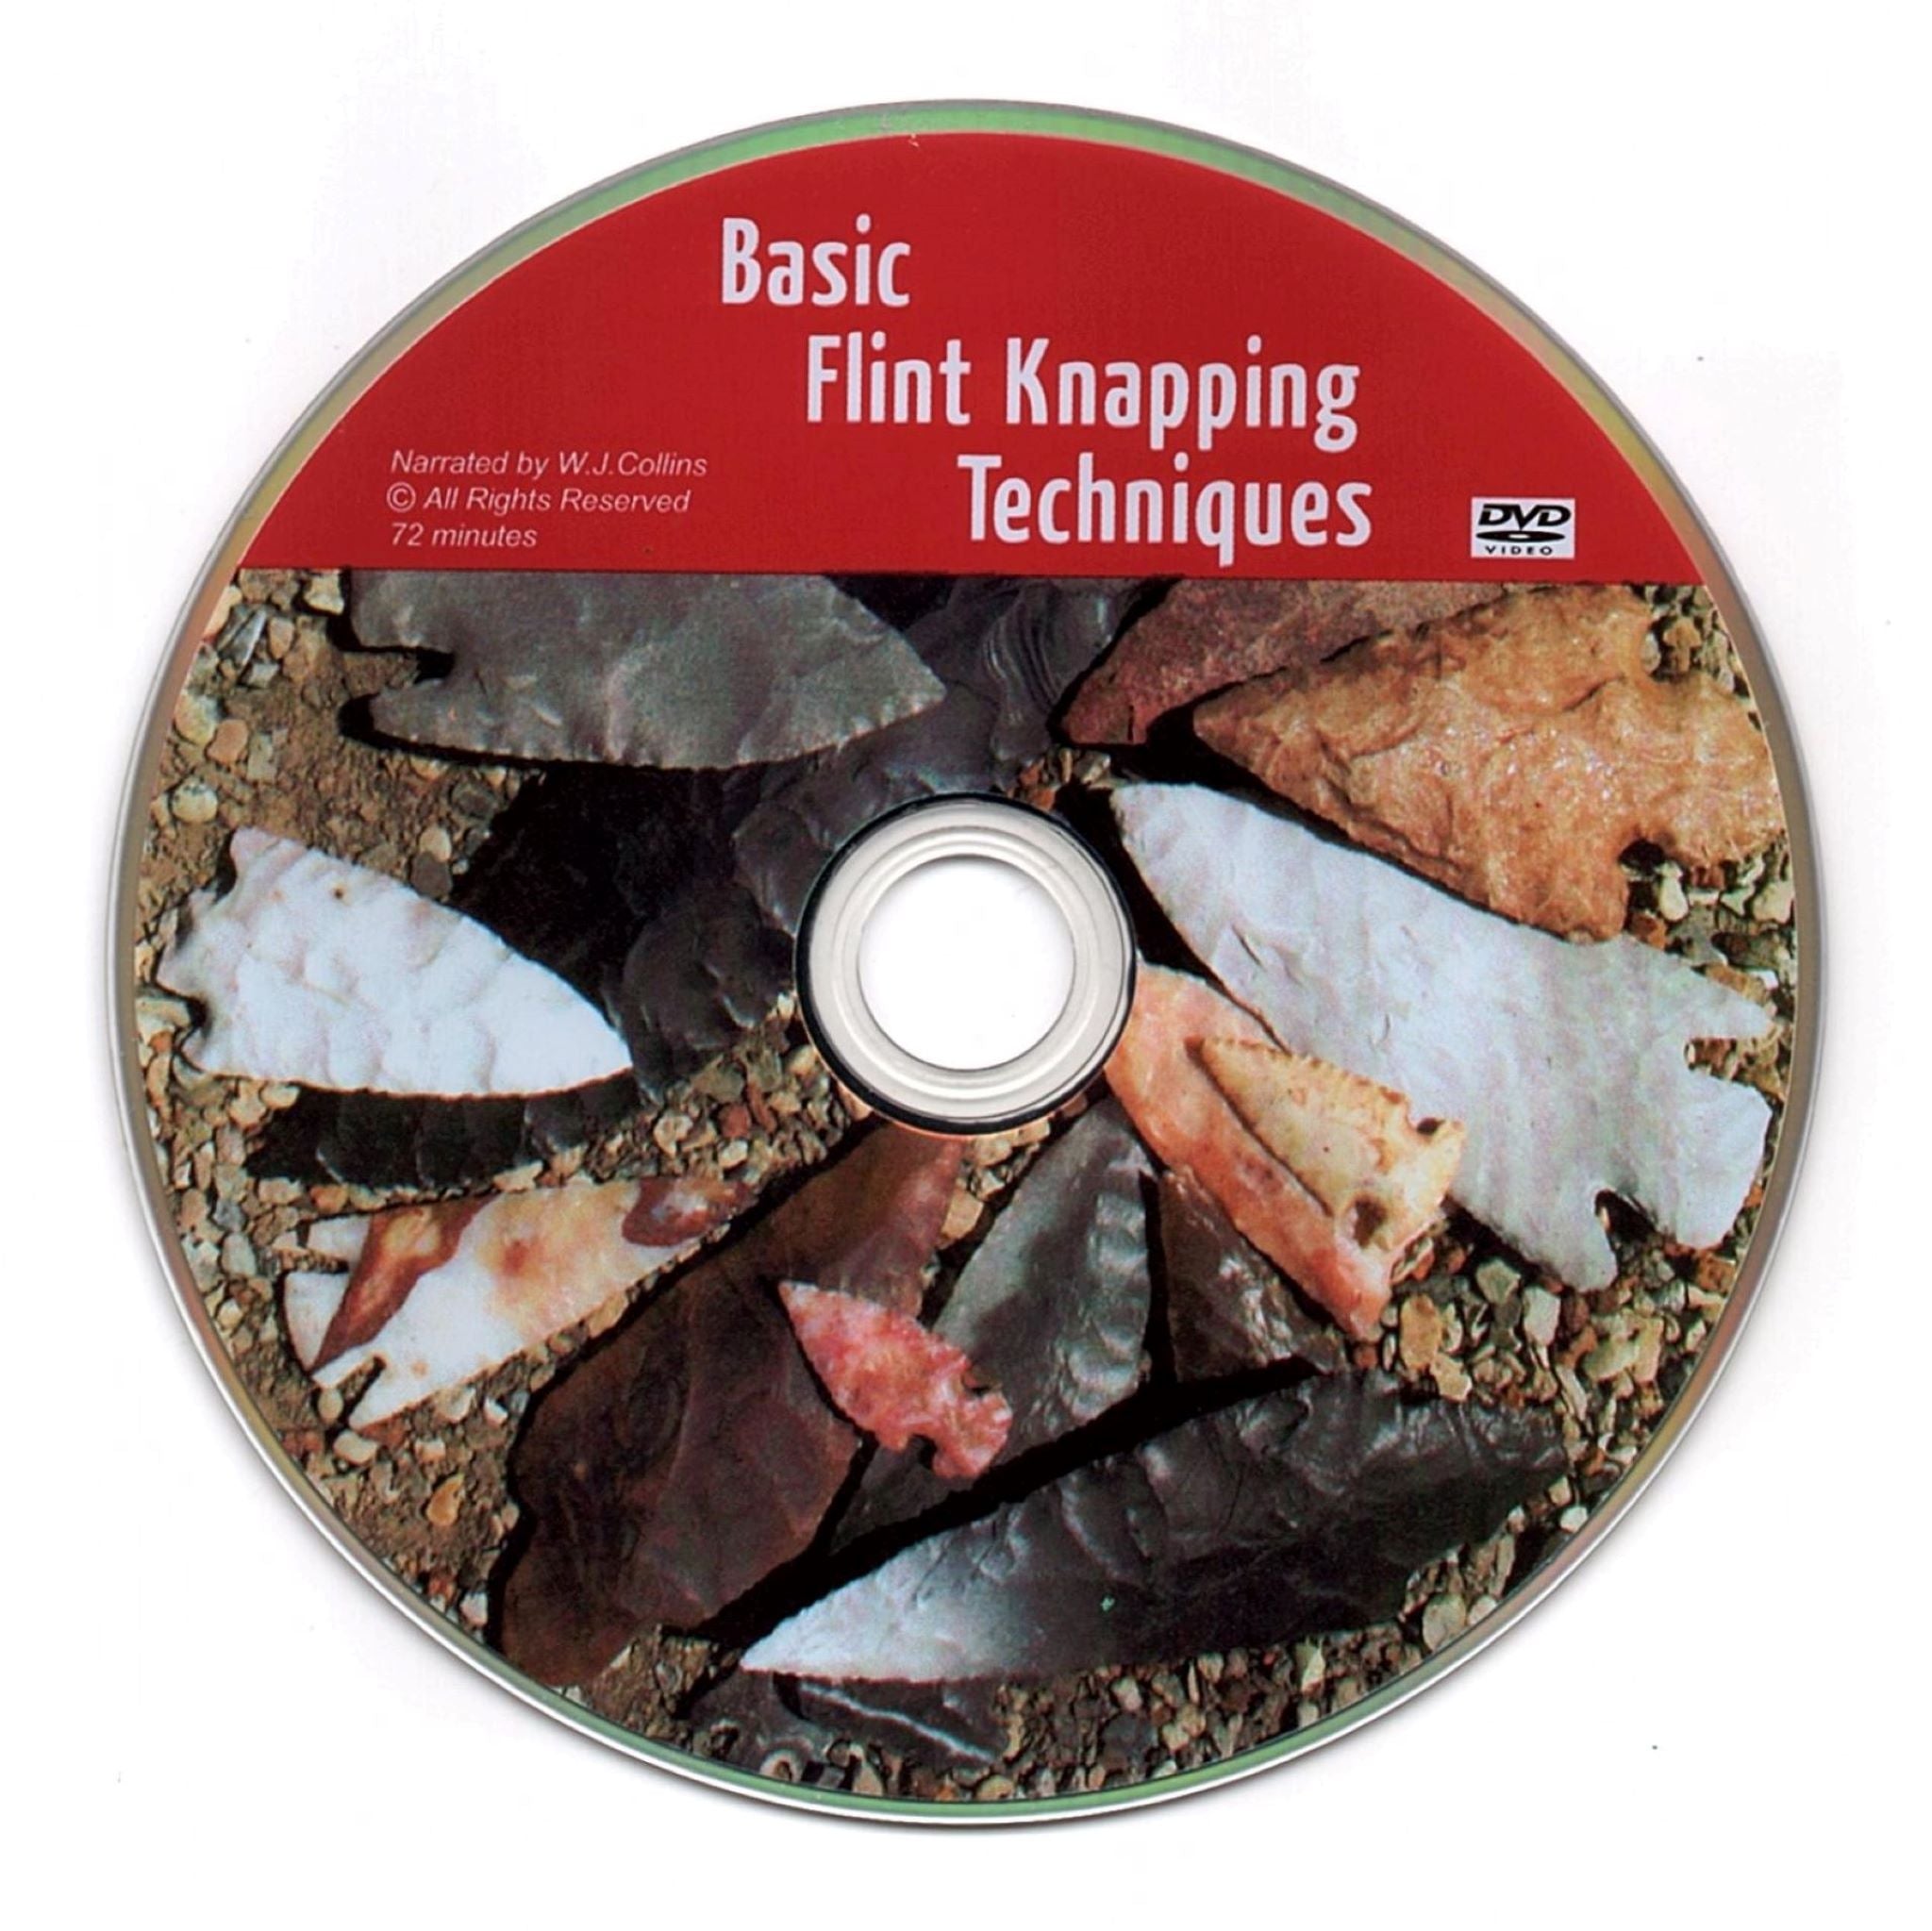 Flint knapping kit for making arrowheads and primitive tools